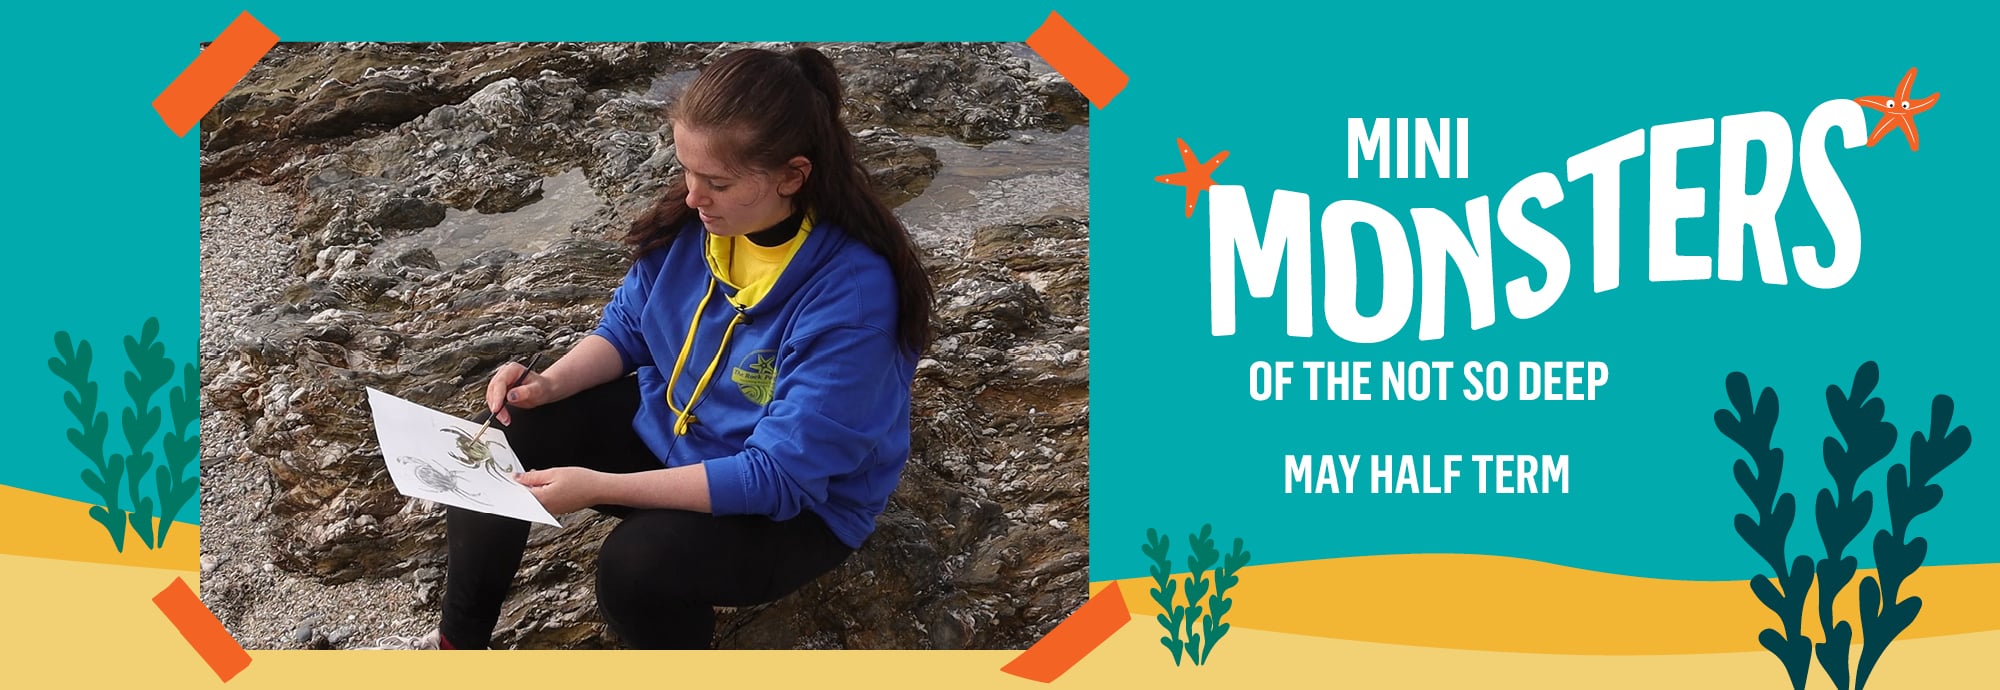 On the right, white text against a blue-green background reads 'Mini Monsters of the Not So Deep' and 'May half term'. On the left is a photo of a young woman in a blue hoodie sitting on some rocks, painting a crab.